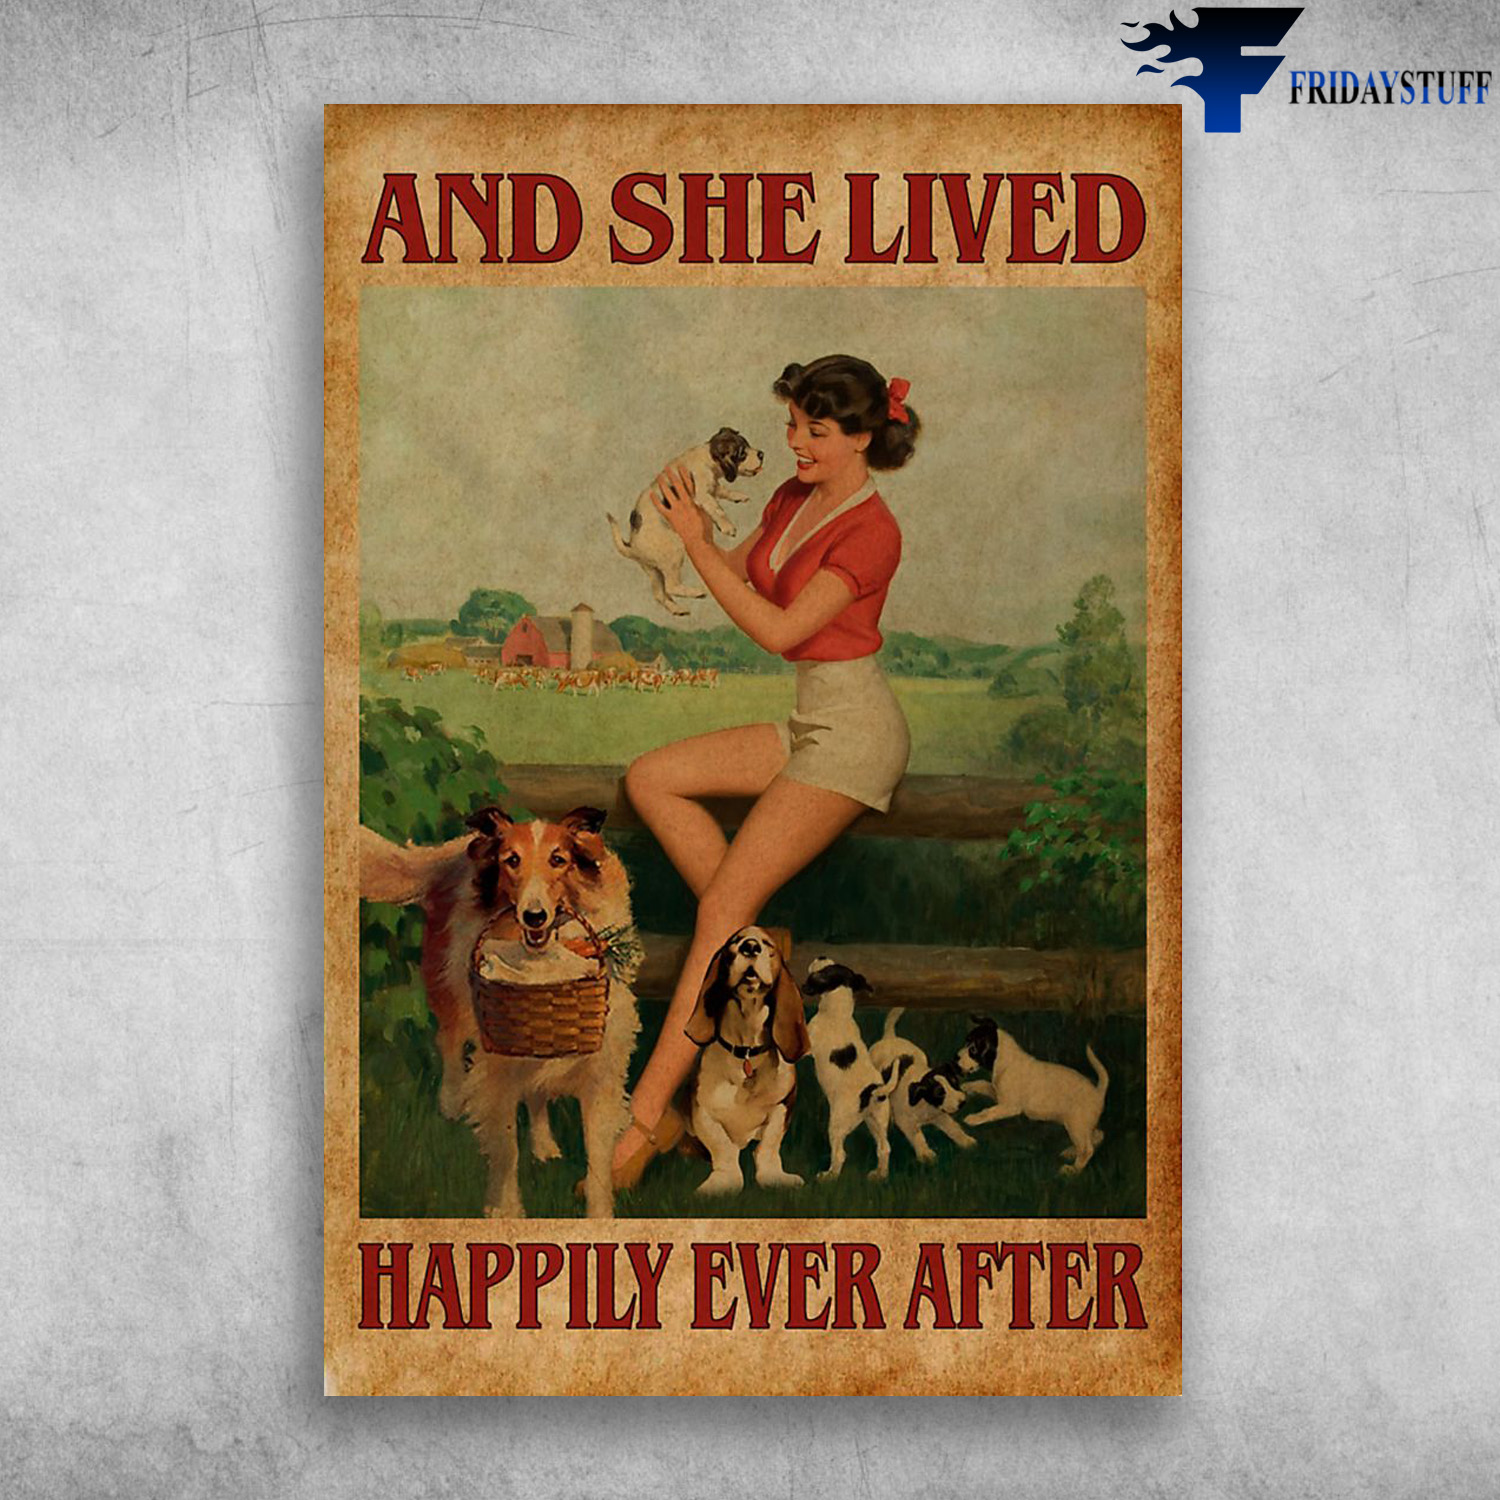 The Girl Love Dogs - And She Lived, Happily Ever After